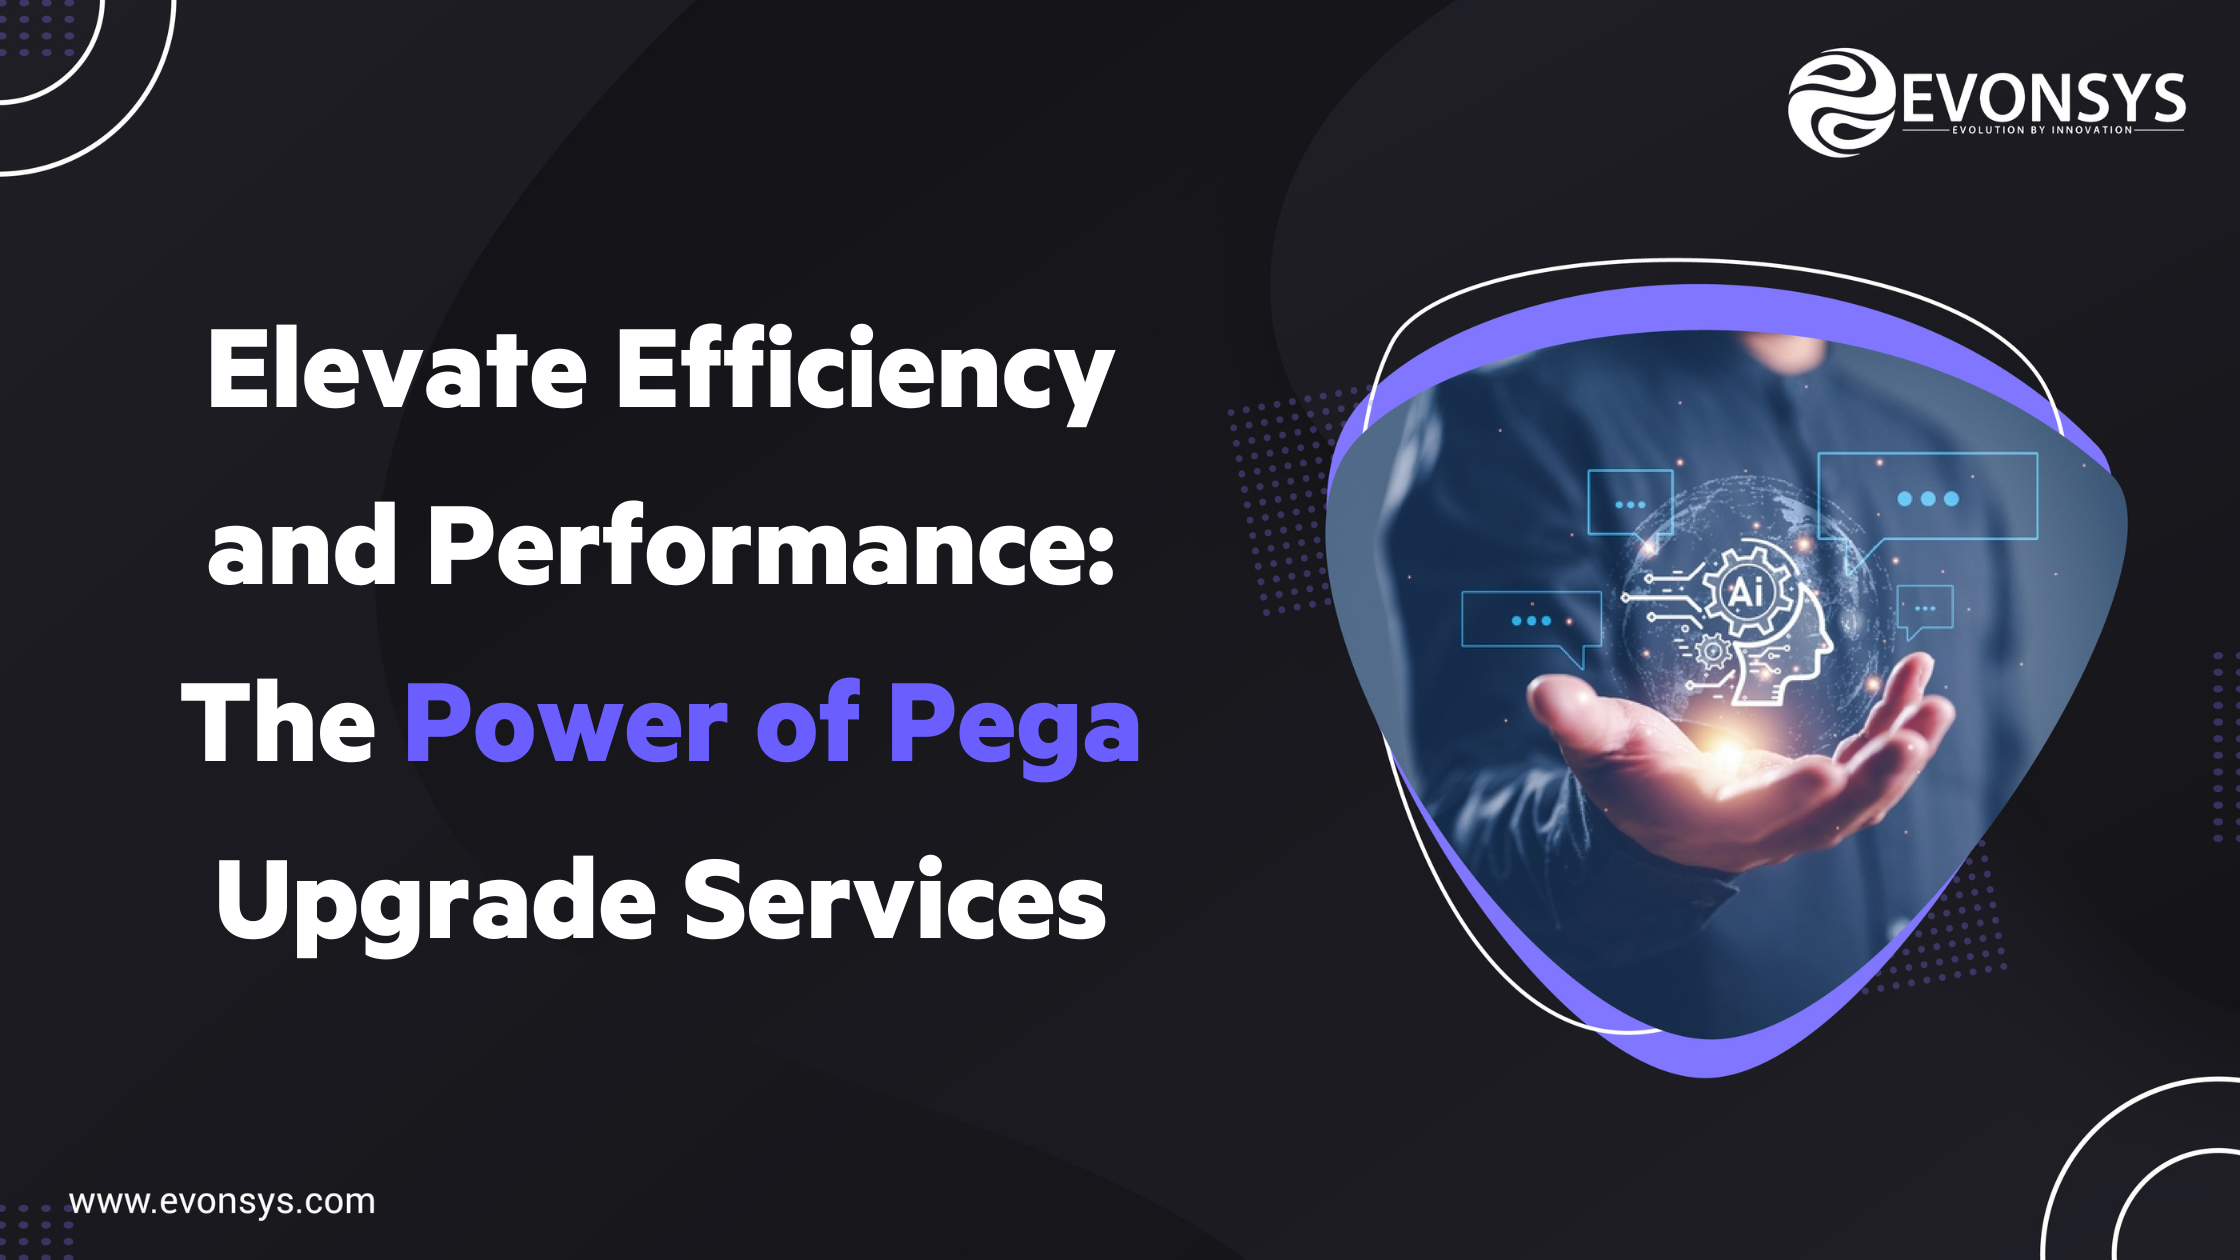 EvonSys_Elevate Efficiency and Performance The Power of Pega Upgrade Services